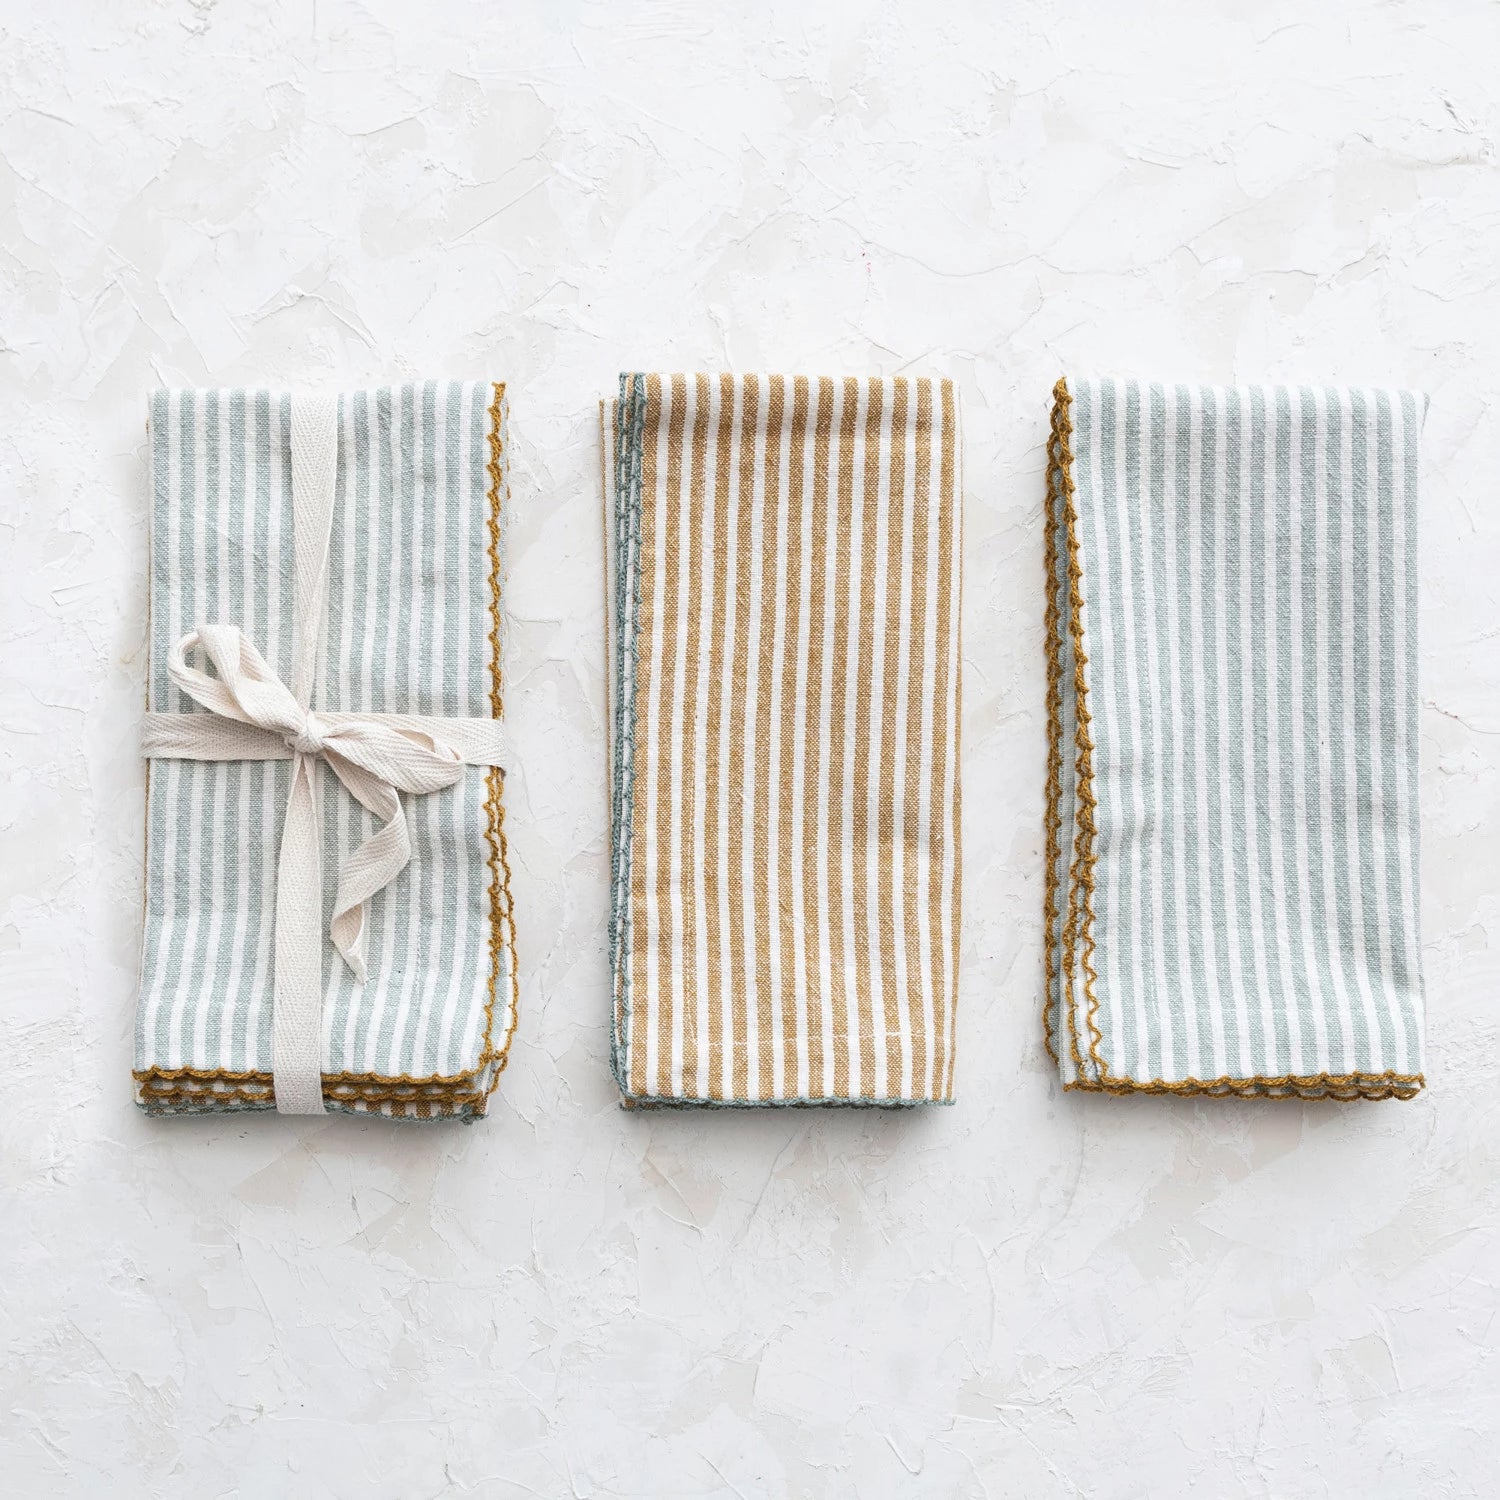 set of napkins folded and tied together with ribbon and 2 other napkins folded and set next to it on a grey surface.